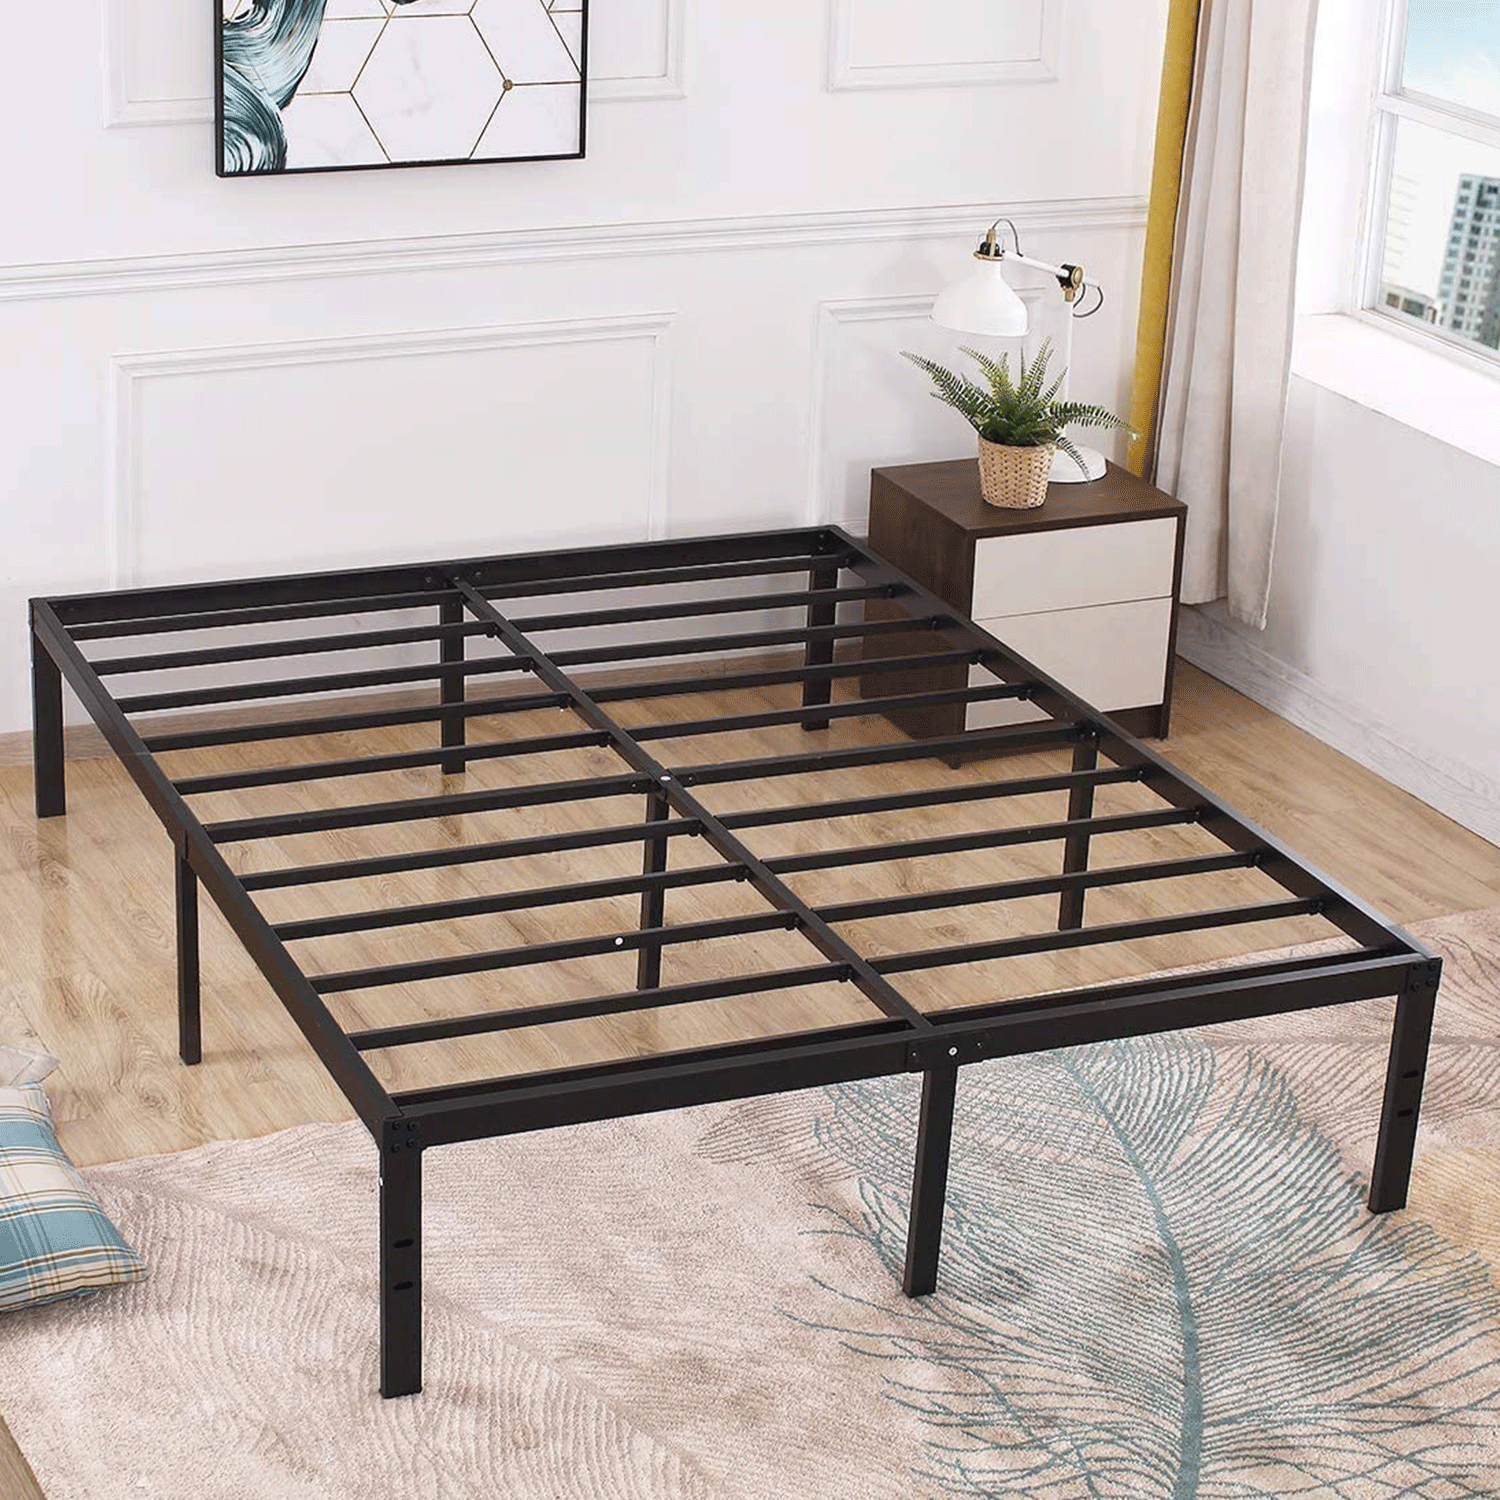 TATAGO 16 inch Heavy Duty Queen Bed Frame with Storage, 3000lbs Max